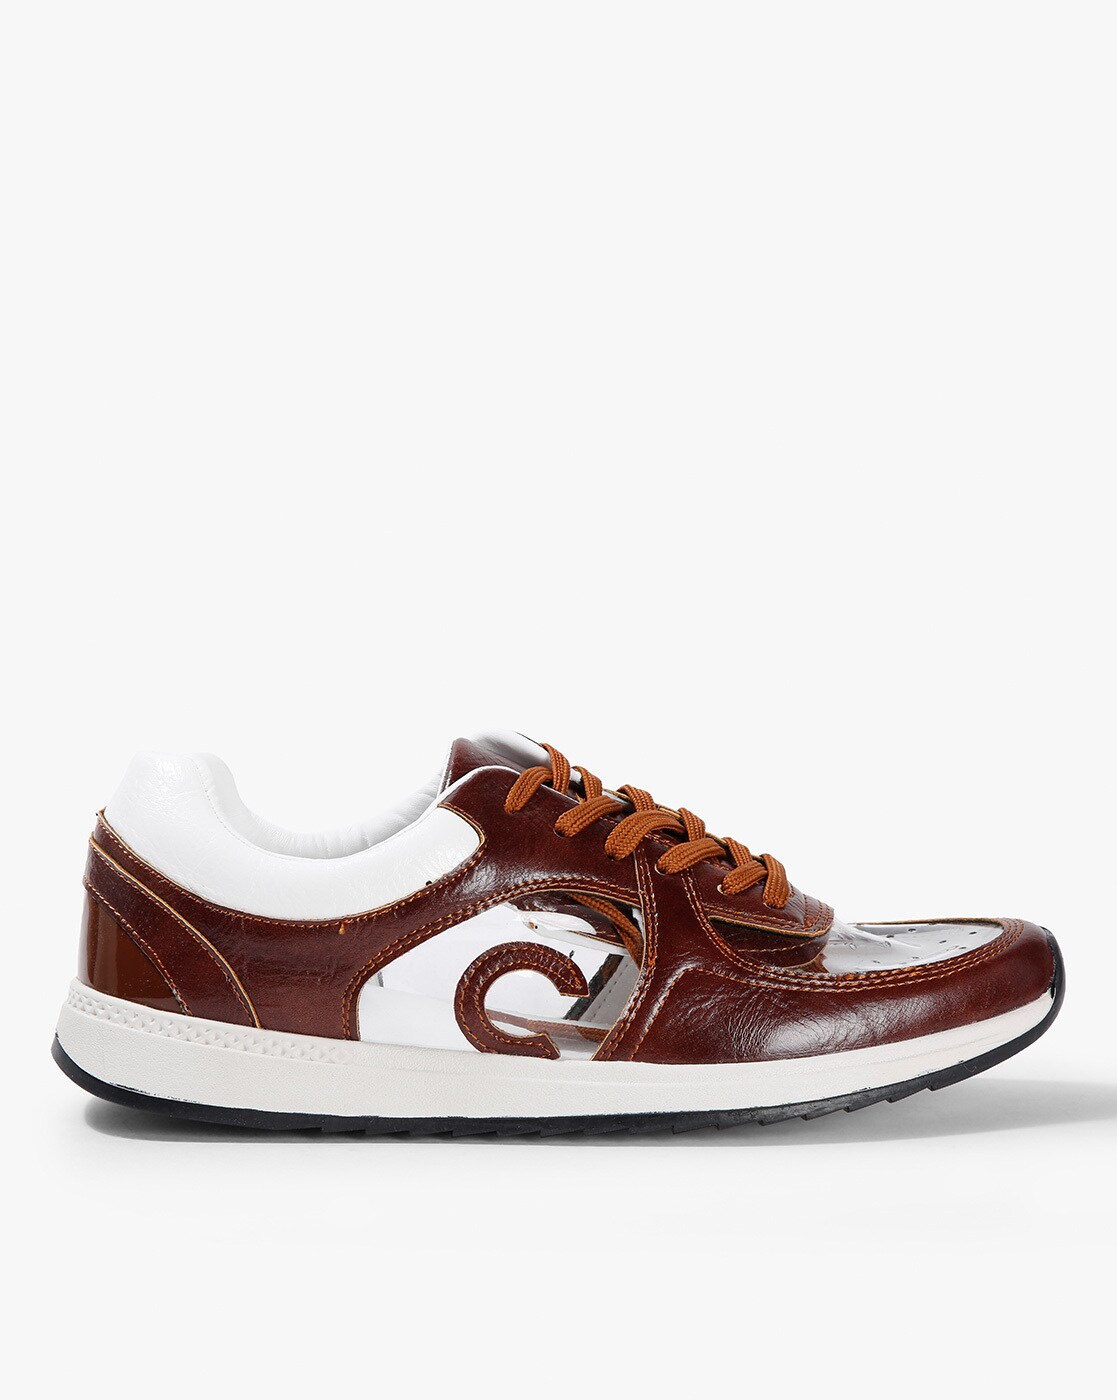 Details more than 151 brown leather sneakers outfit best